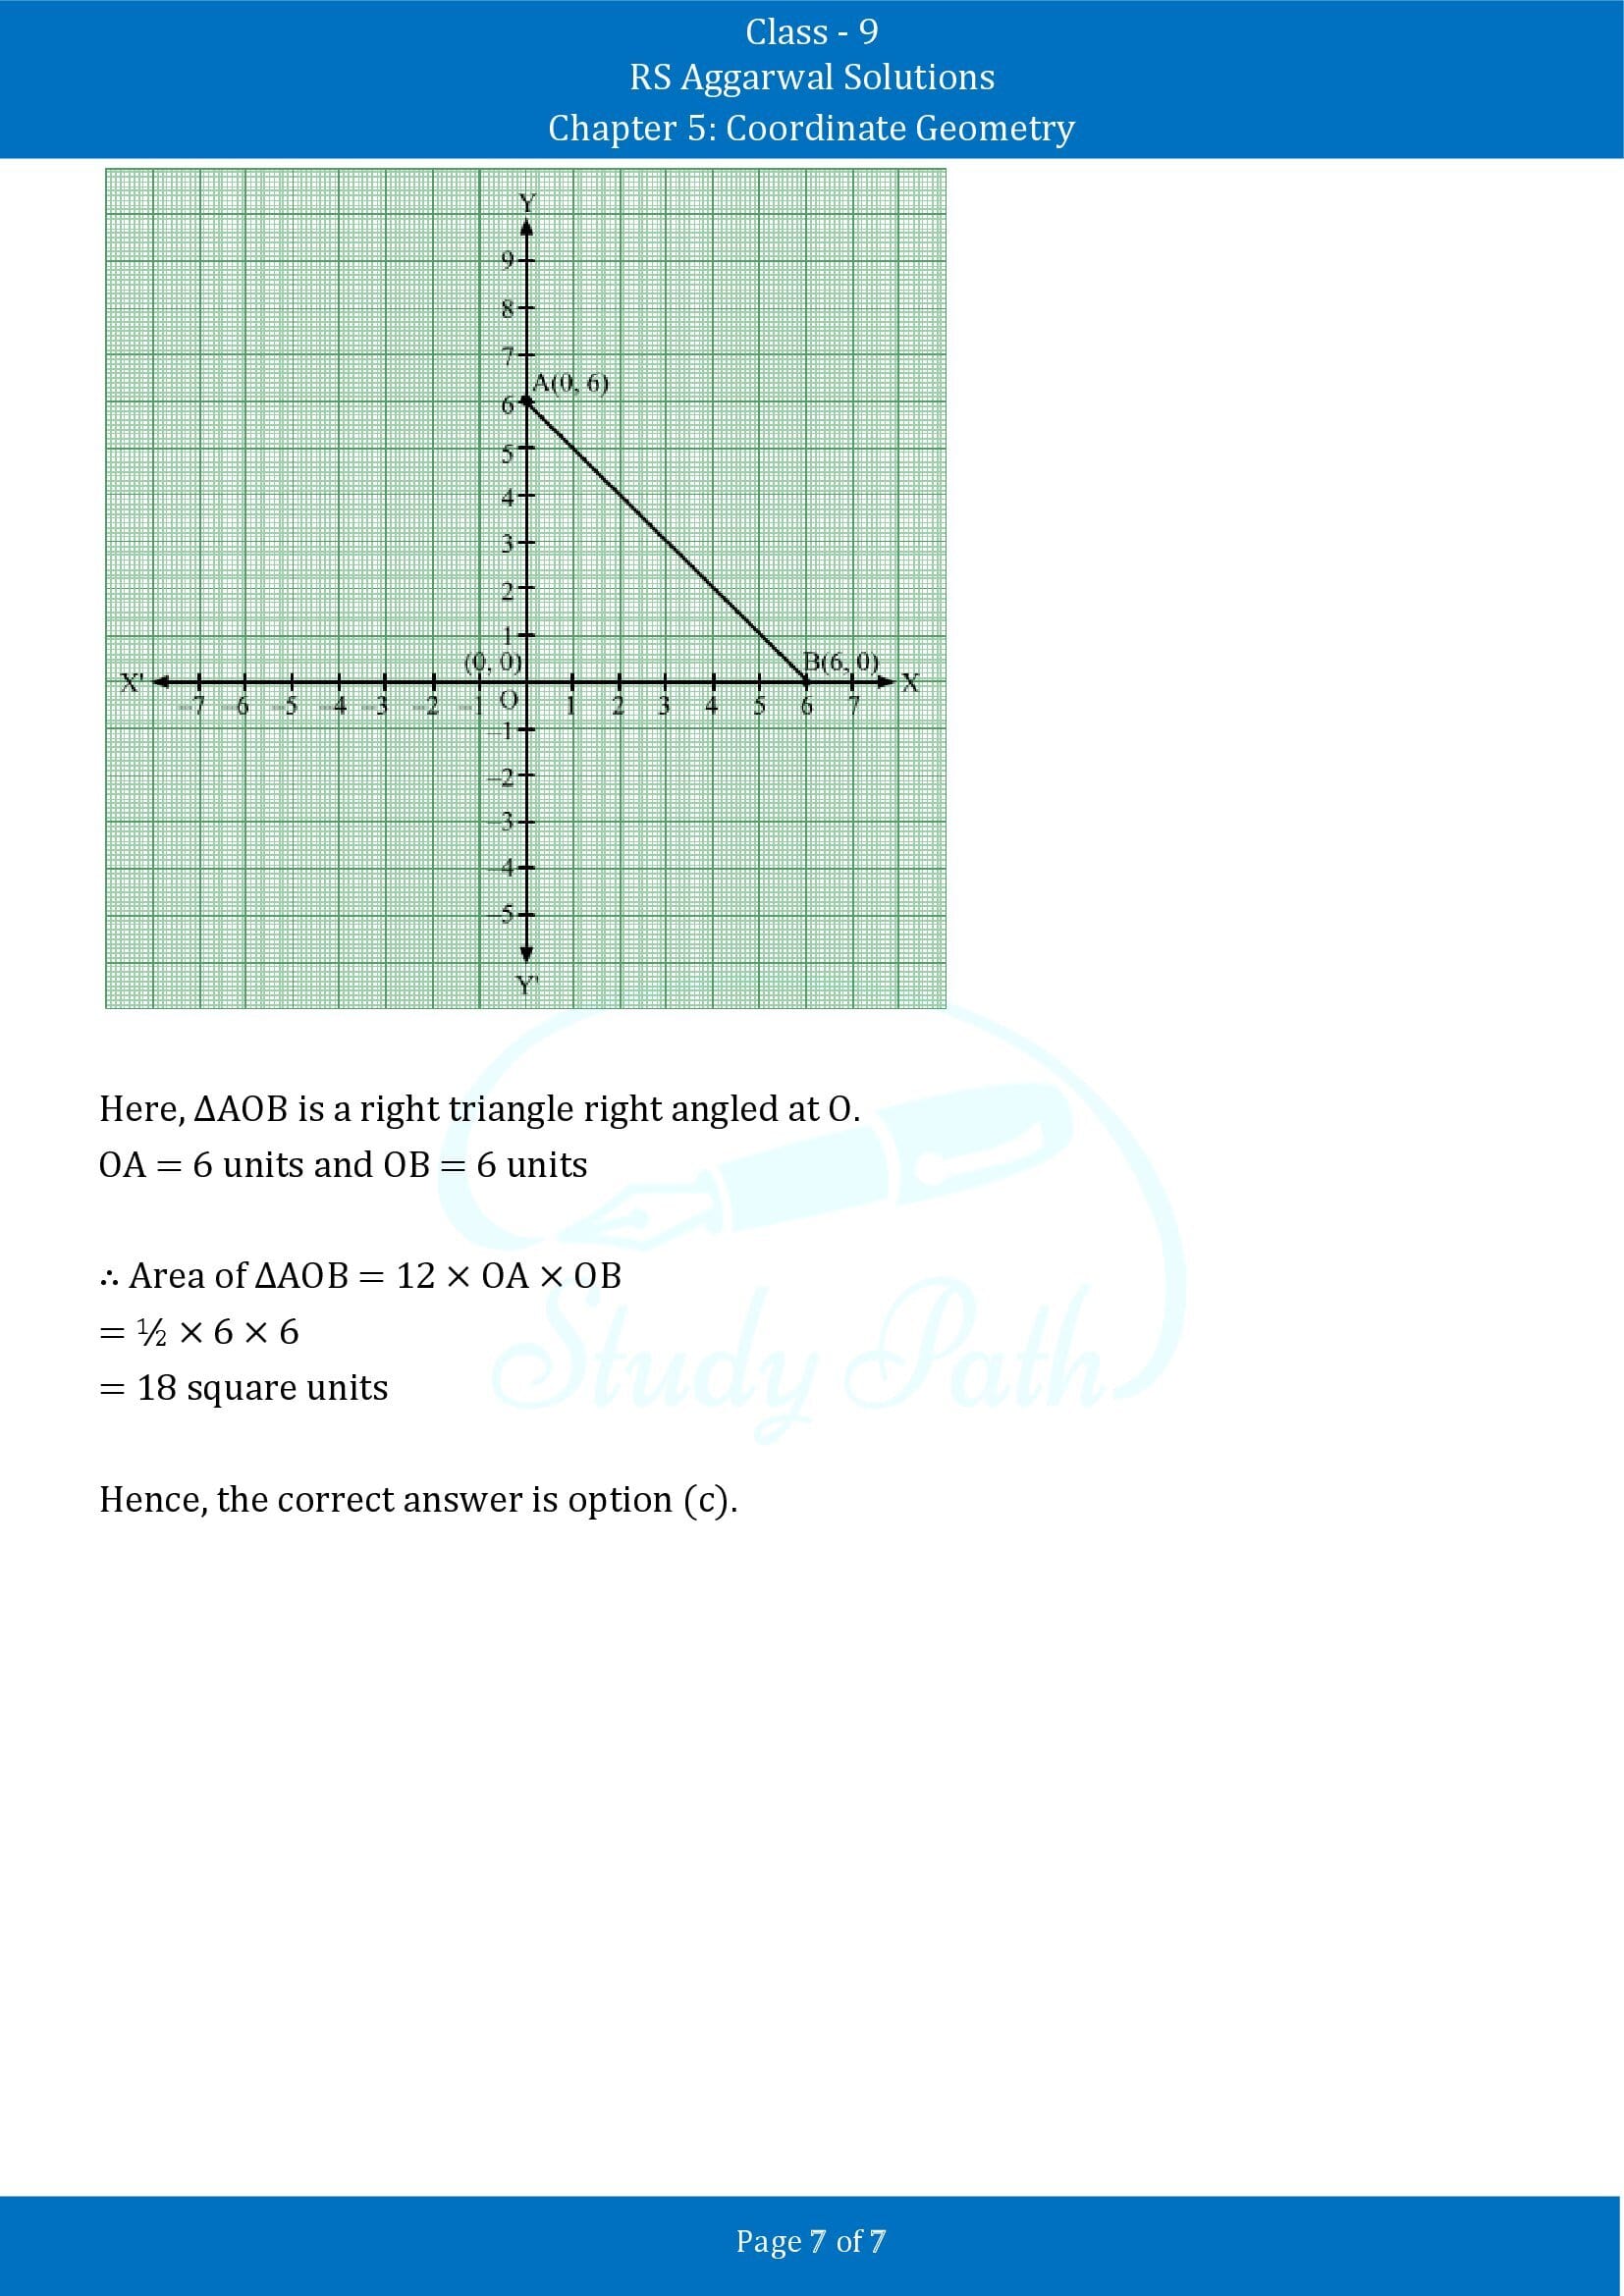 RS Aggarwal Solutions Class 9 Chapter 5 Coordinate Geometry Multiple Choice Questions MCQs 00007